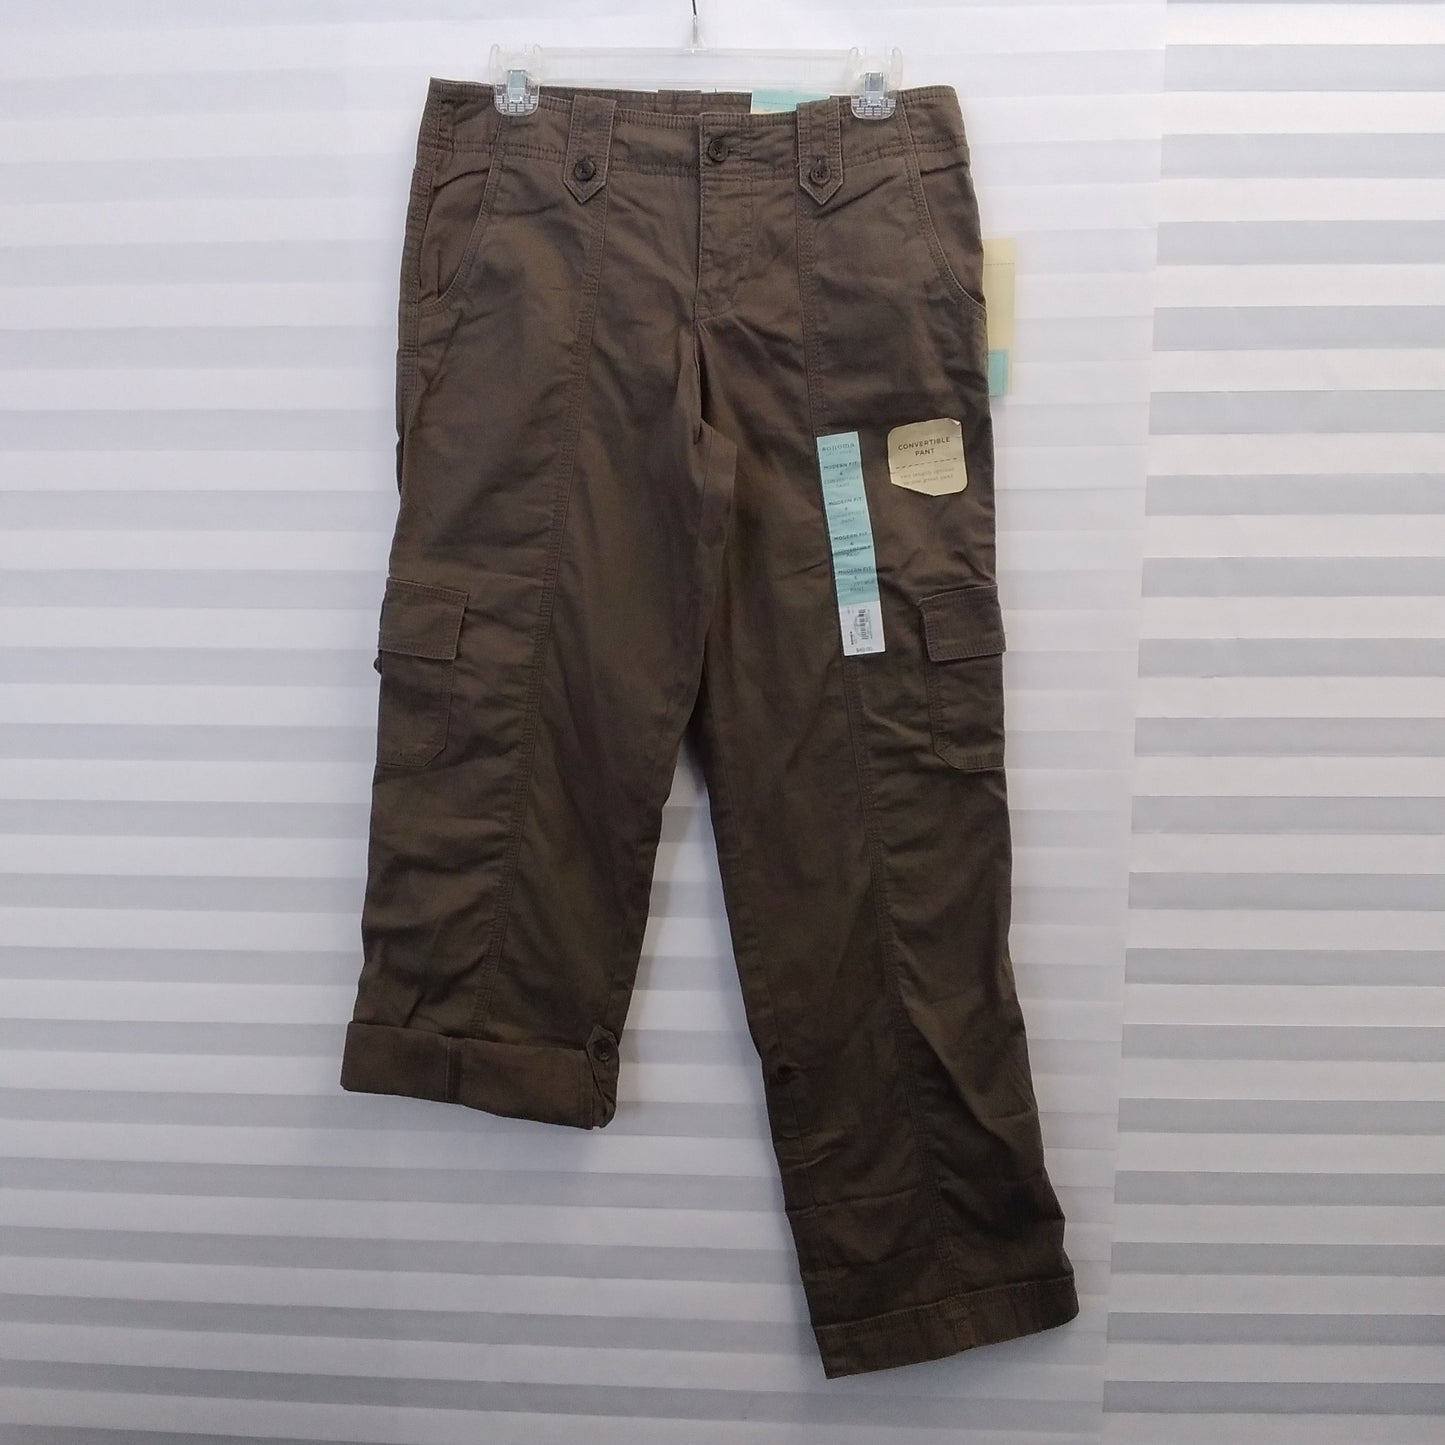 NWT - Sonoma Life + Style Misses Brown Convertible Pants - Size: 6